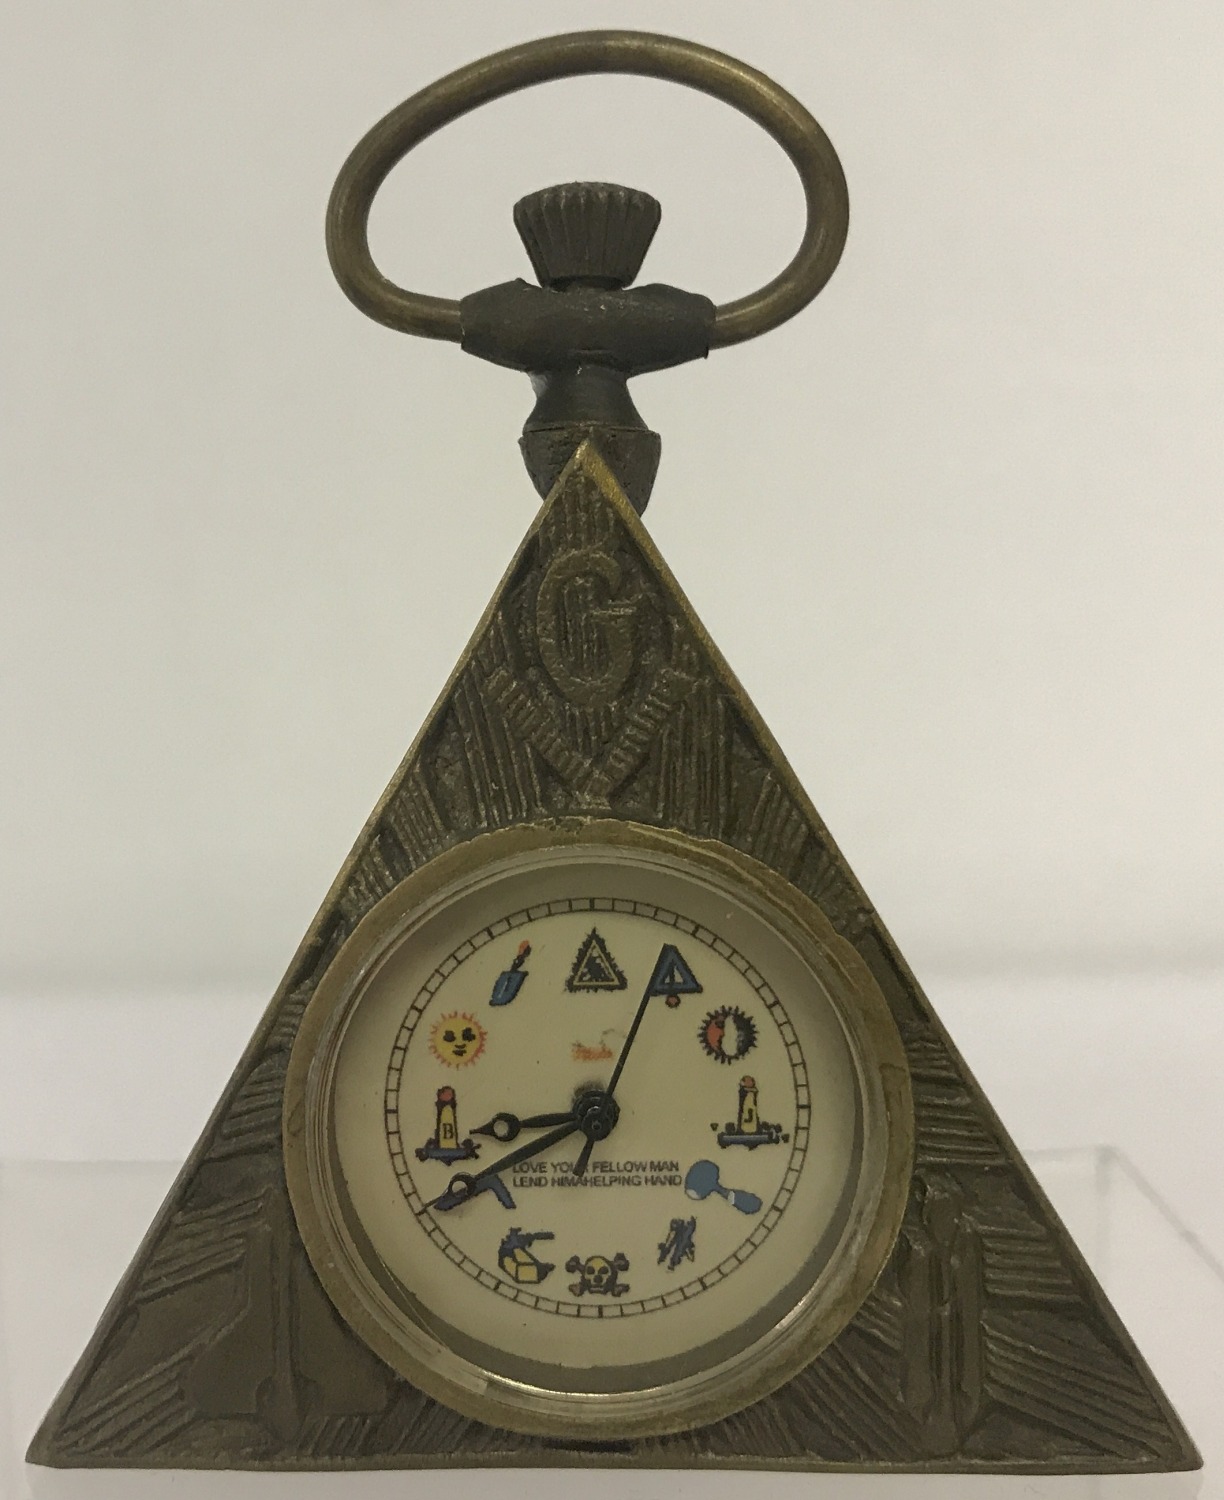 A small brass cased, triangular shaped pocket watch with Masonic style decoration.